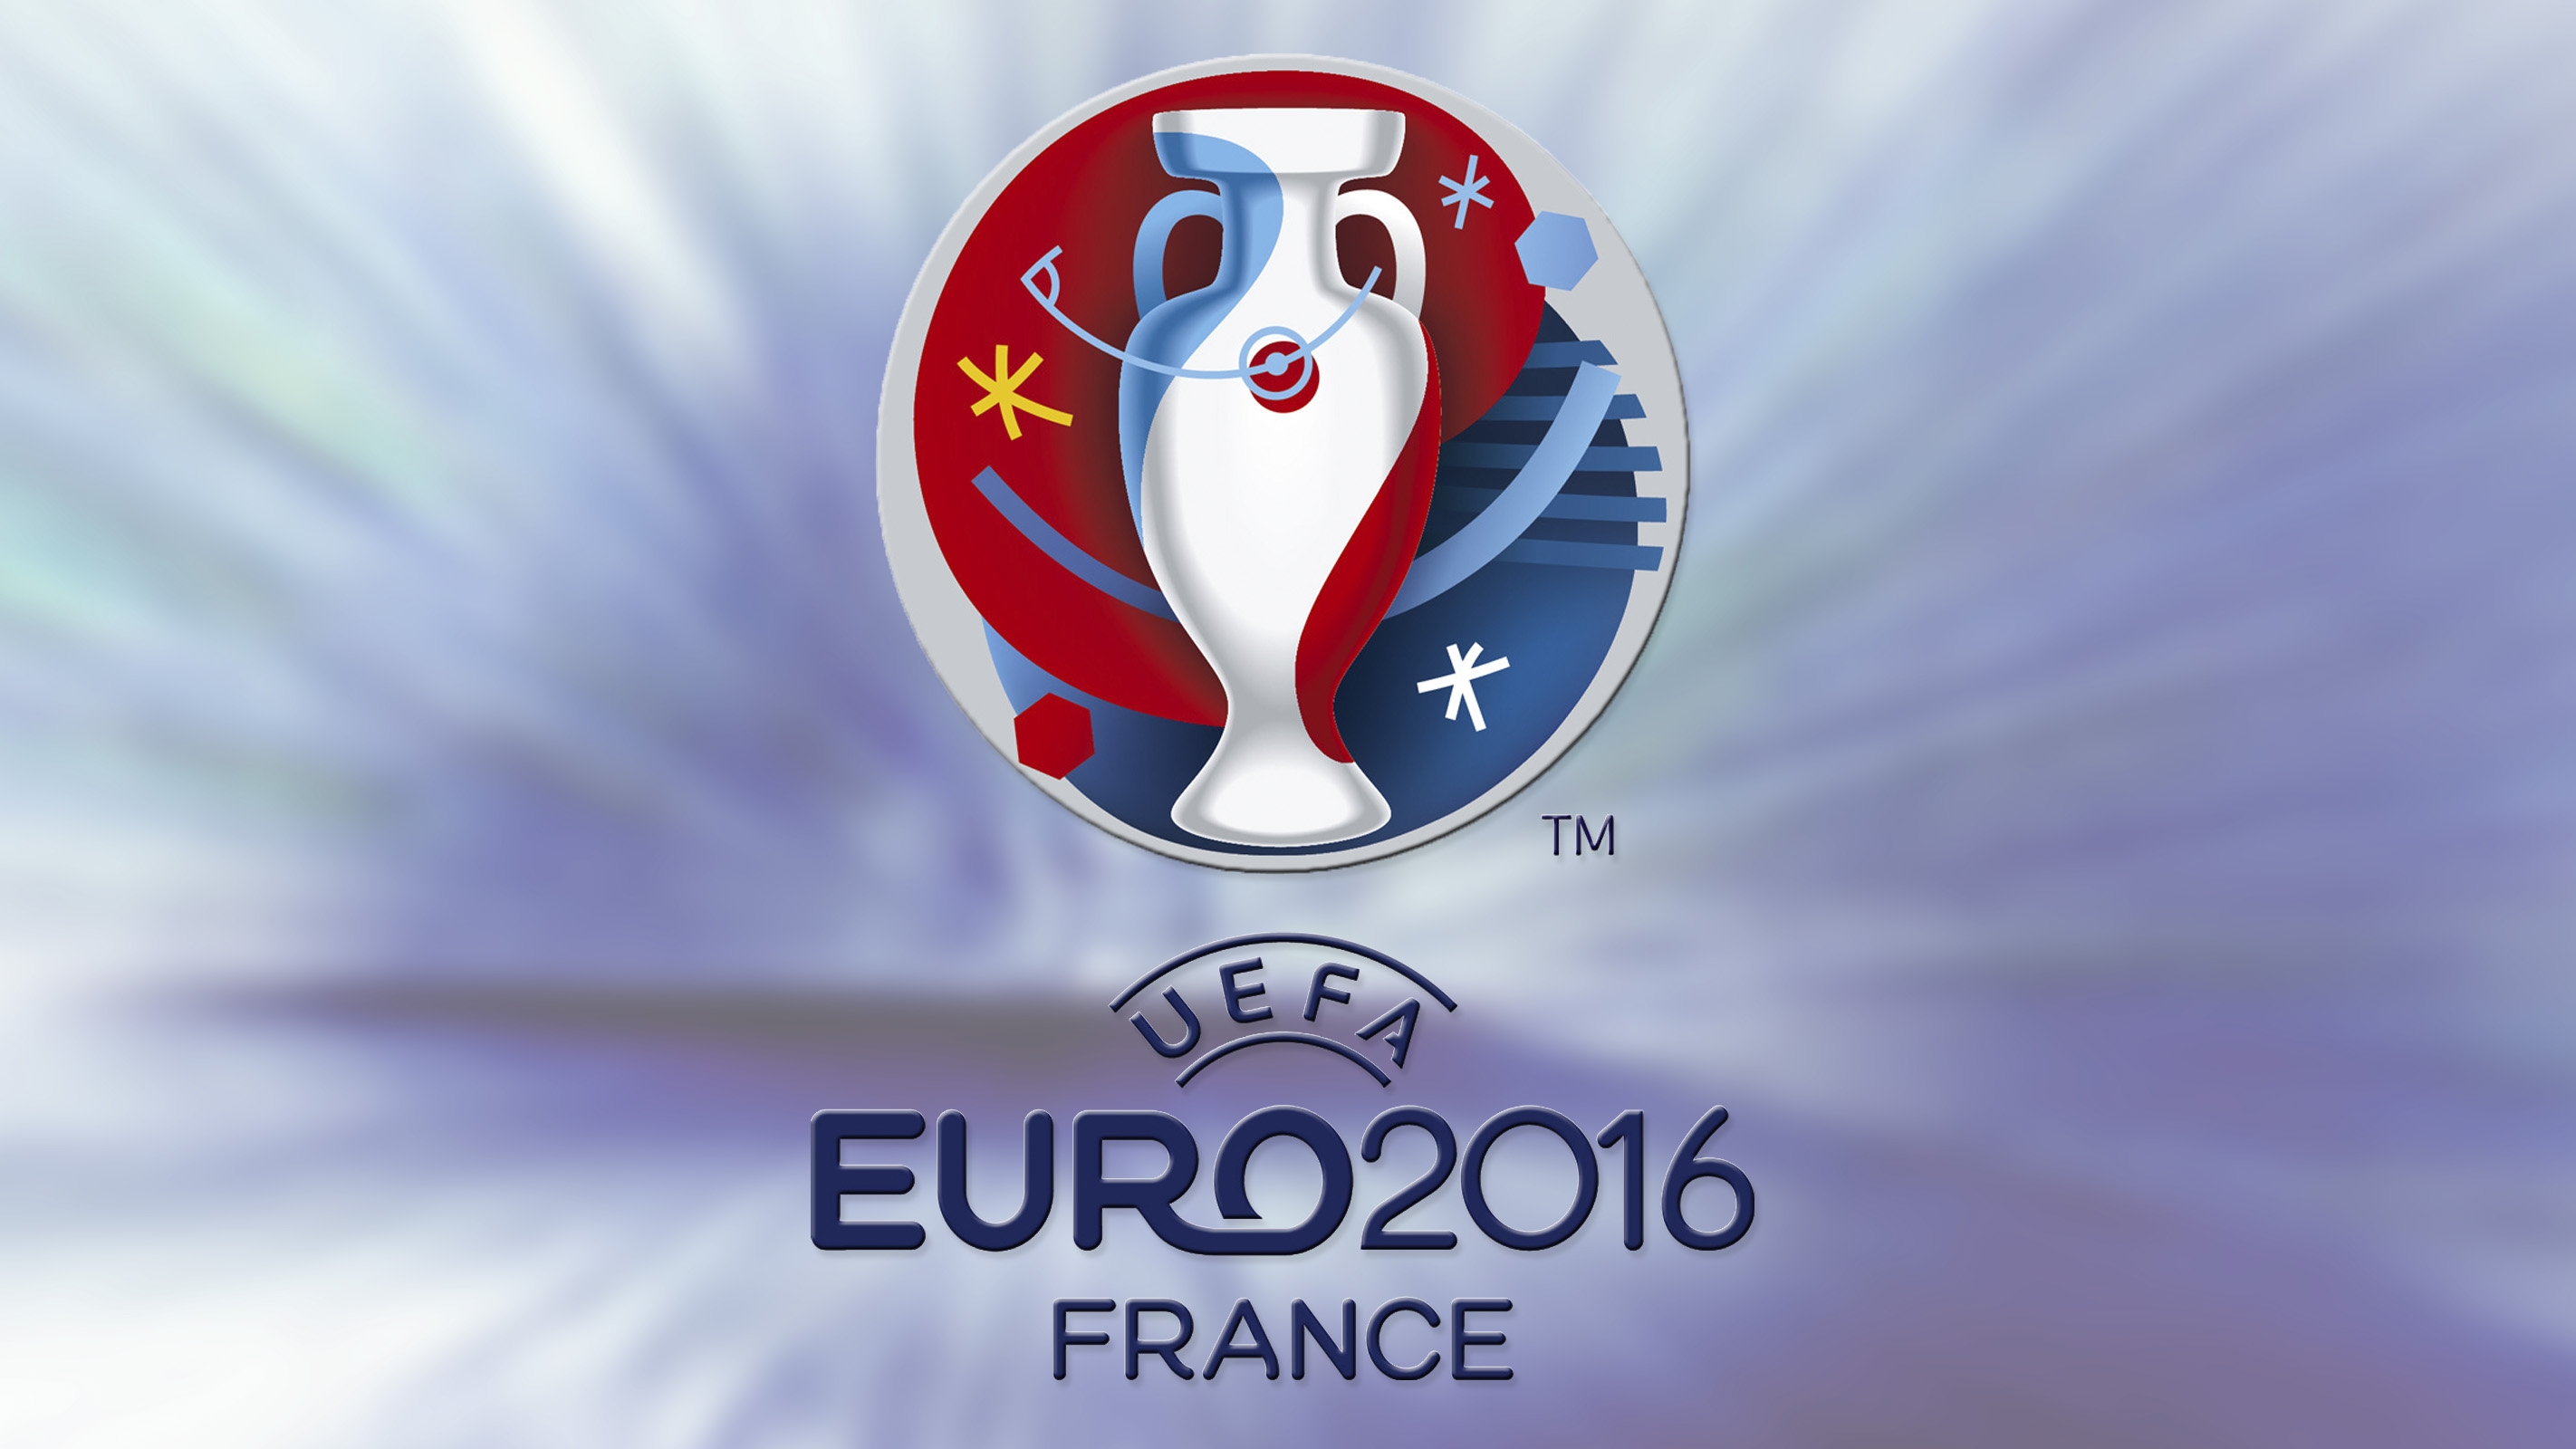 Suspicious package found prior to EURO 2016 Game in Paris. Is this just the beginning?